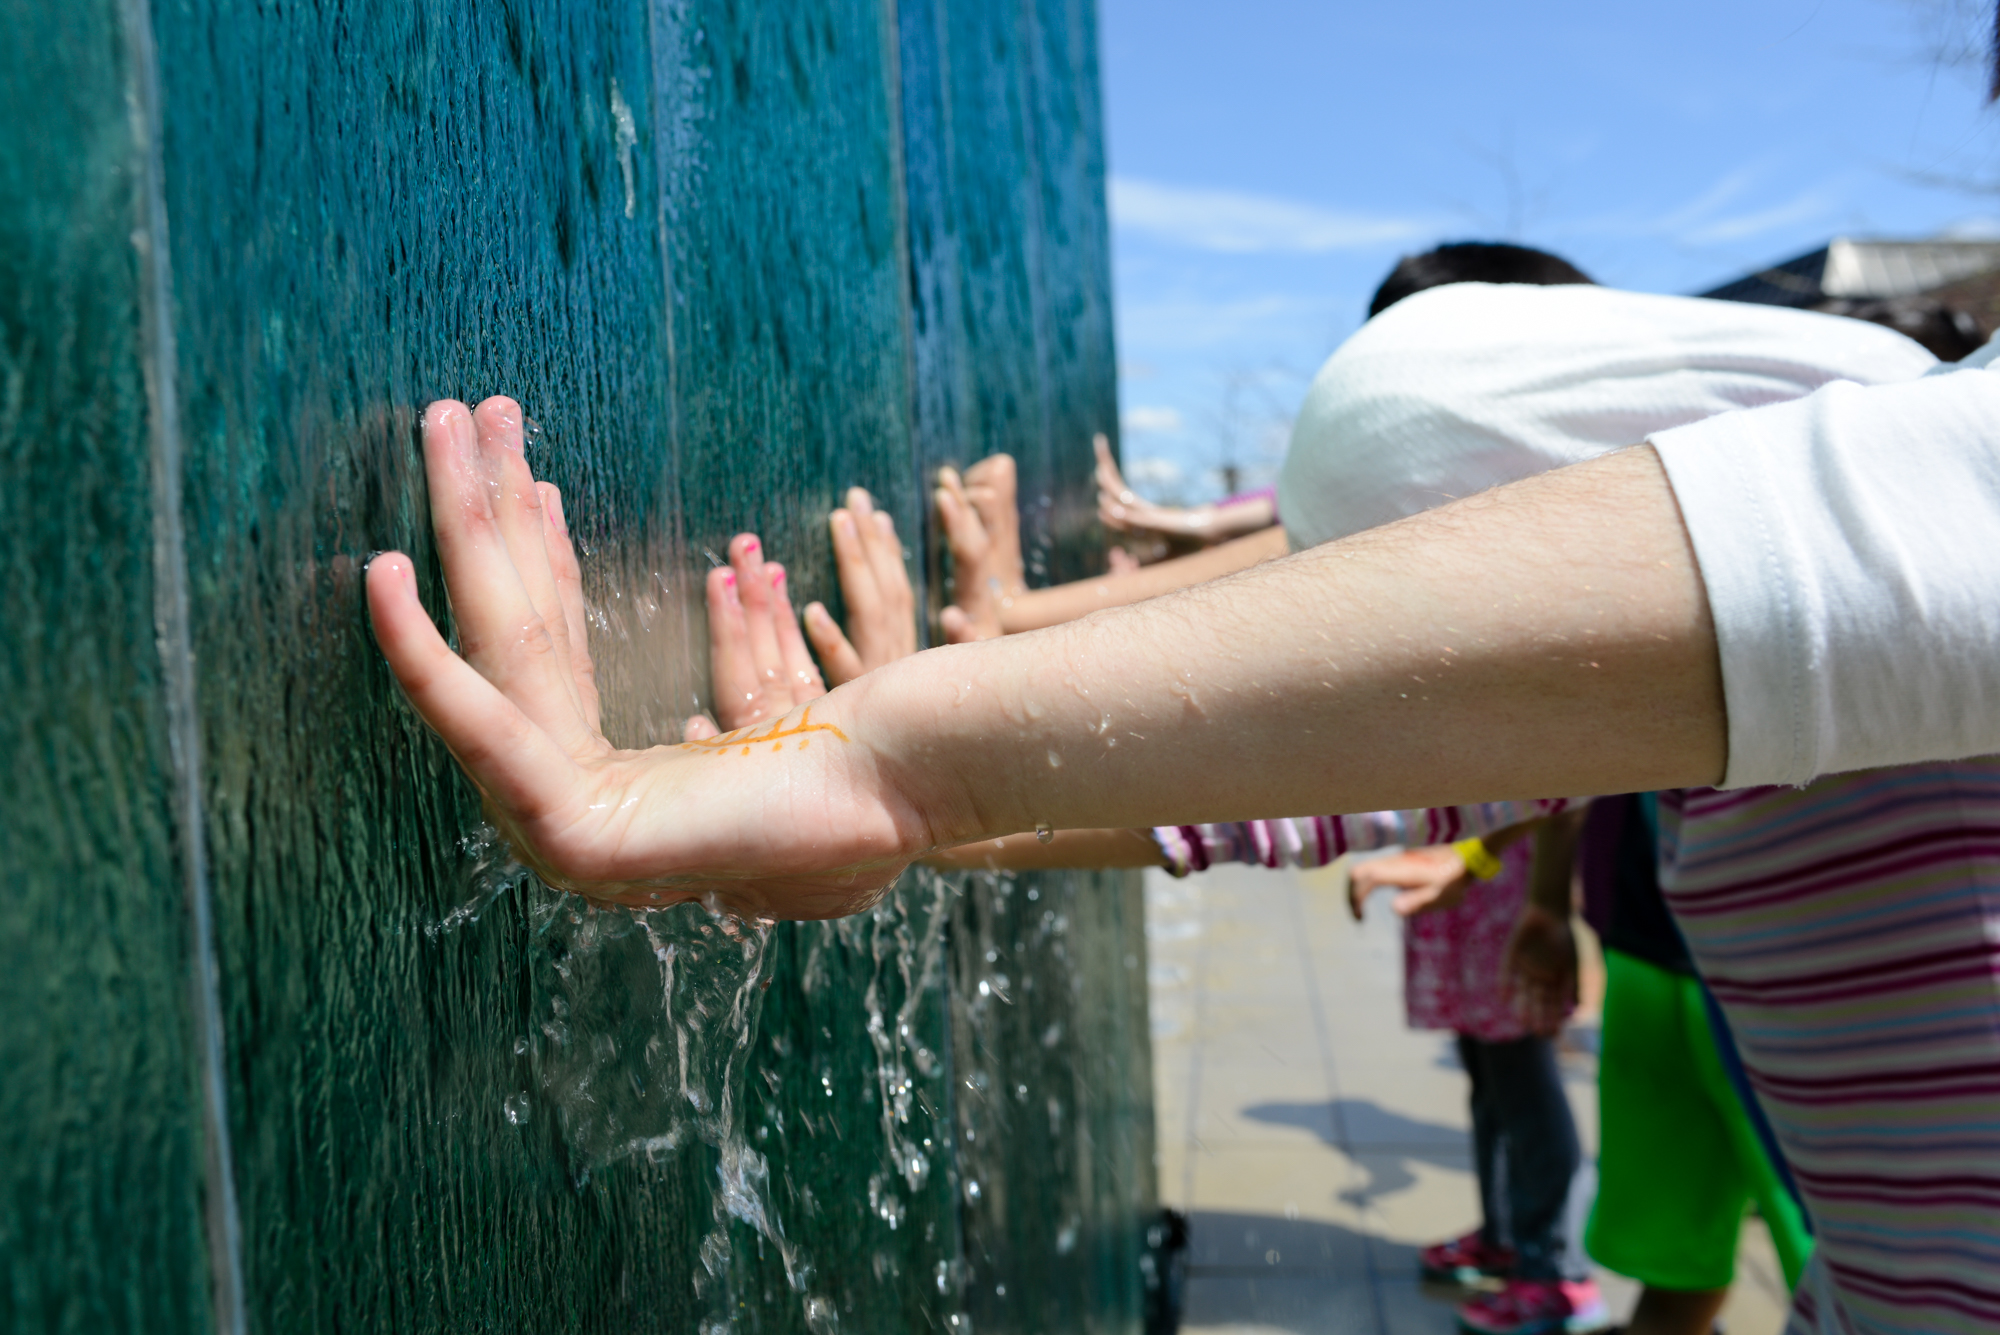 Children hold their hands up to a fountain in global village during Imagine RIT: Innovation and Creativity Festival on the Rochester Institute of Technology campus in Rochester, N.Y., May 7, 2016. (Photo by Jackie Molloy) #imaginerit #ritpj